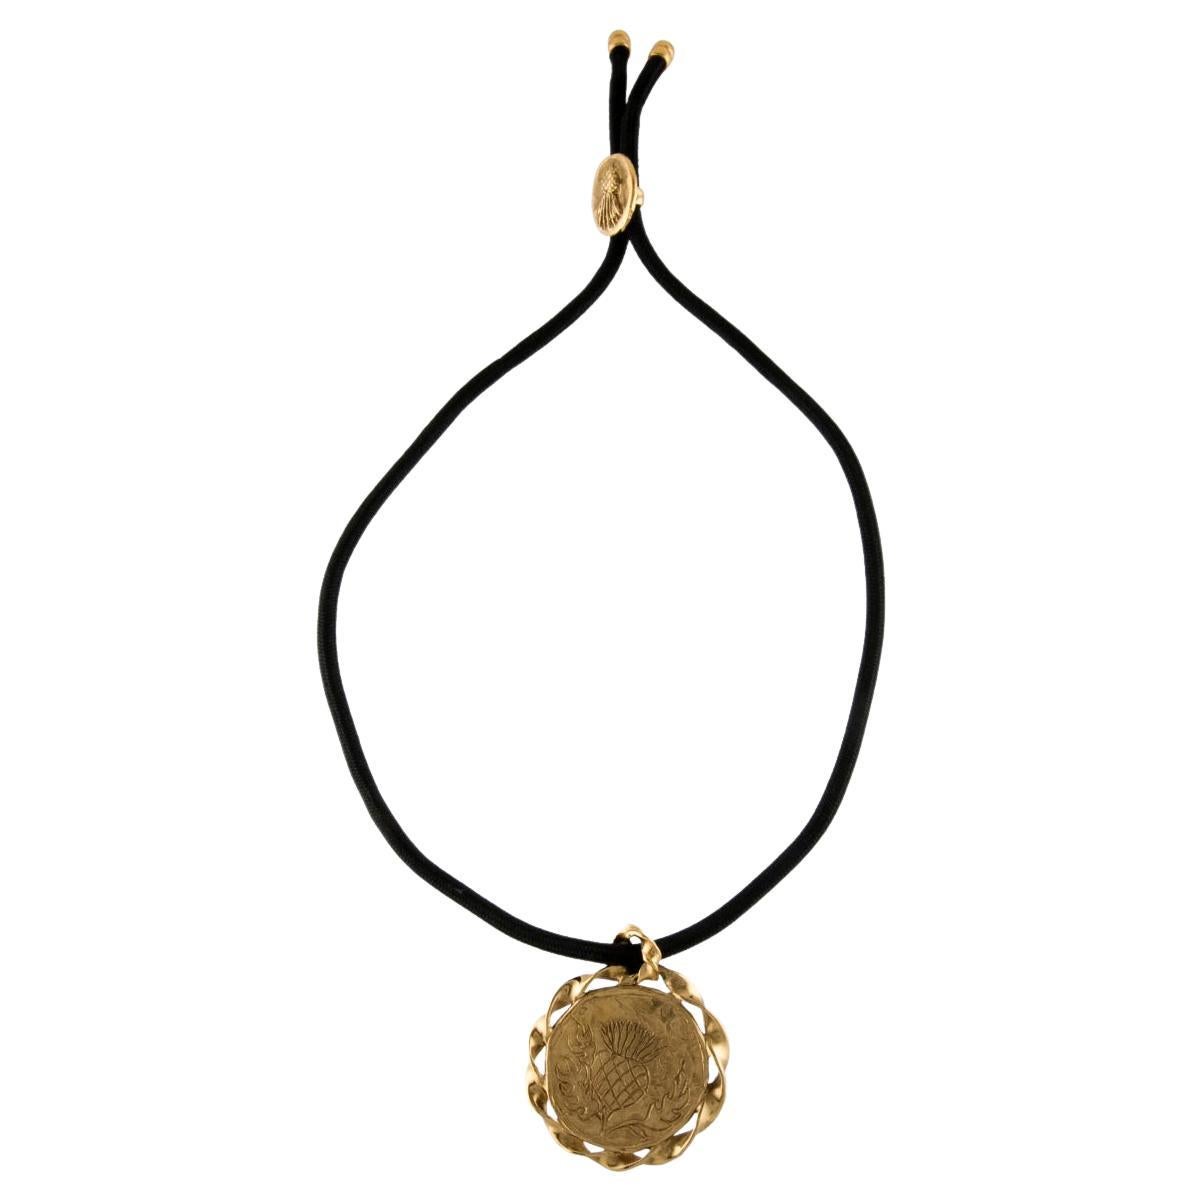 What is a medallion necklace?